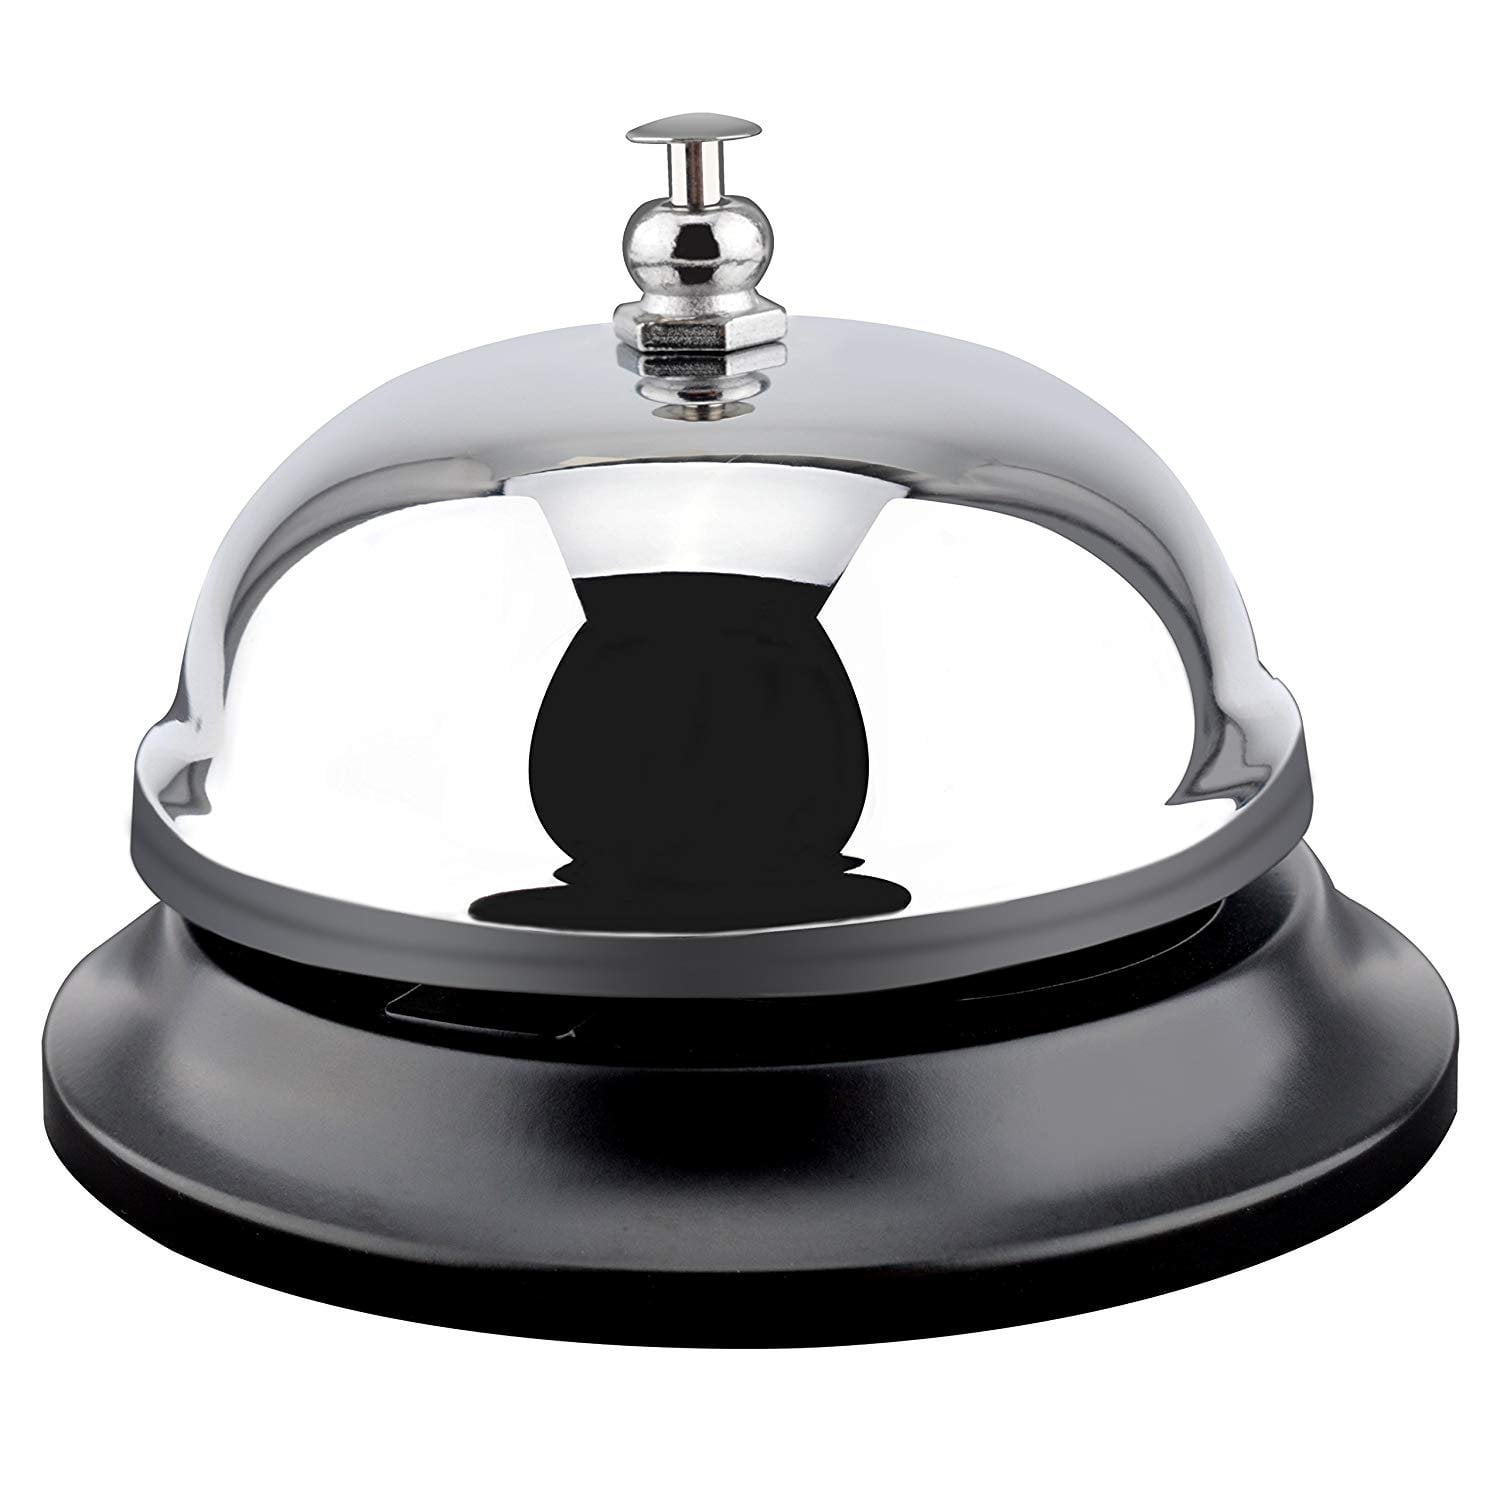 Restaurant Games,Hotel Bell 3.38 Inch Diameter for Desk Bell MROCO Call Bells for Call Customer Service 4 Count Service Bell with Metal Anti-Rust Construction Dinner Bell and Teacher Bell 